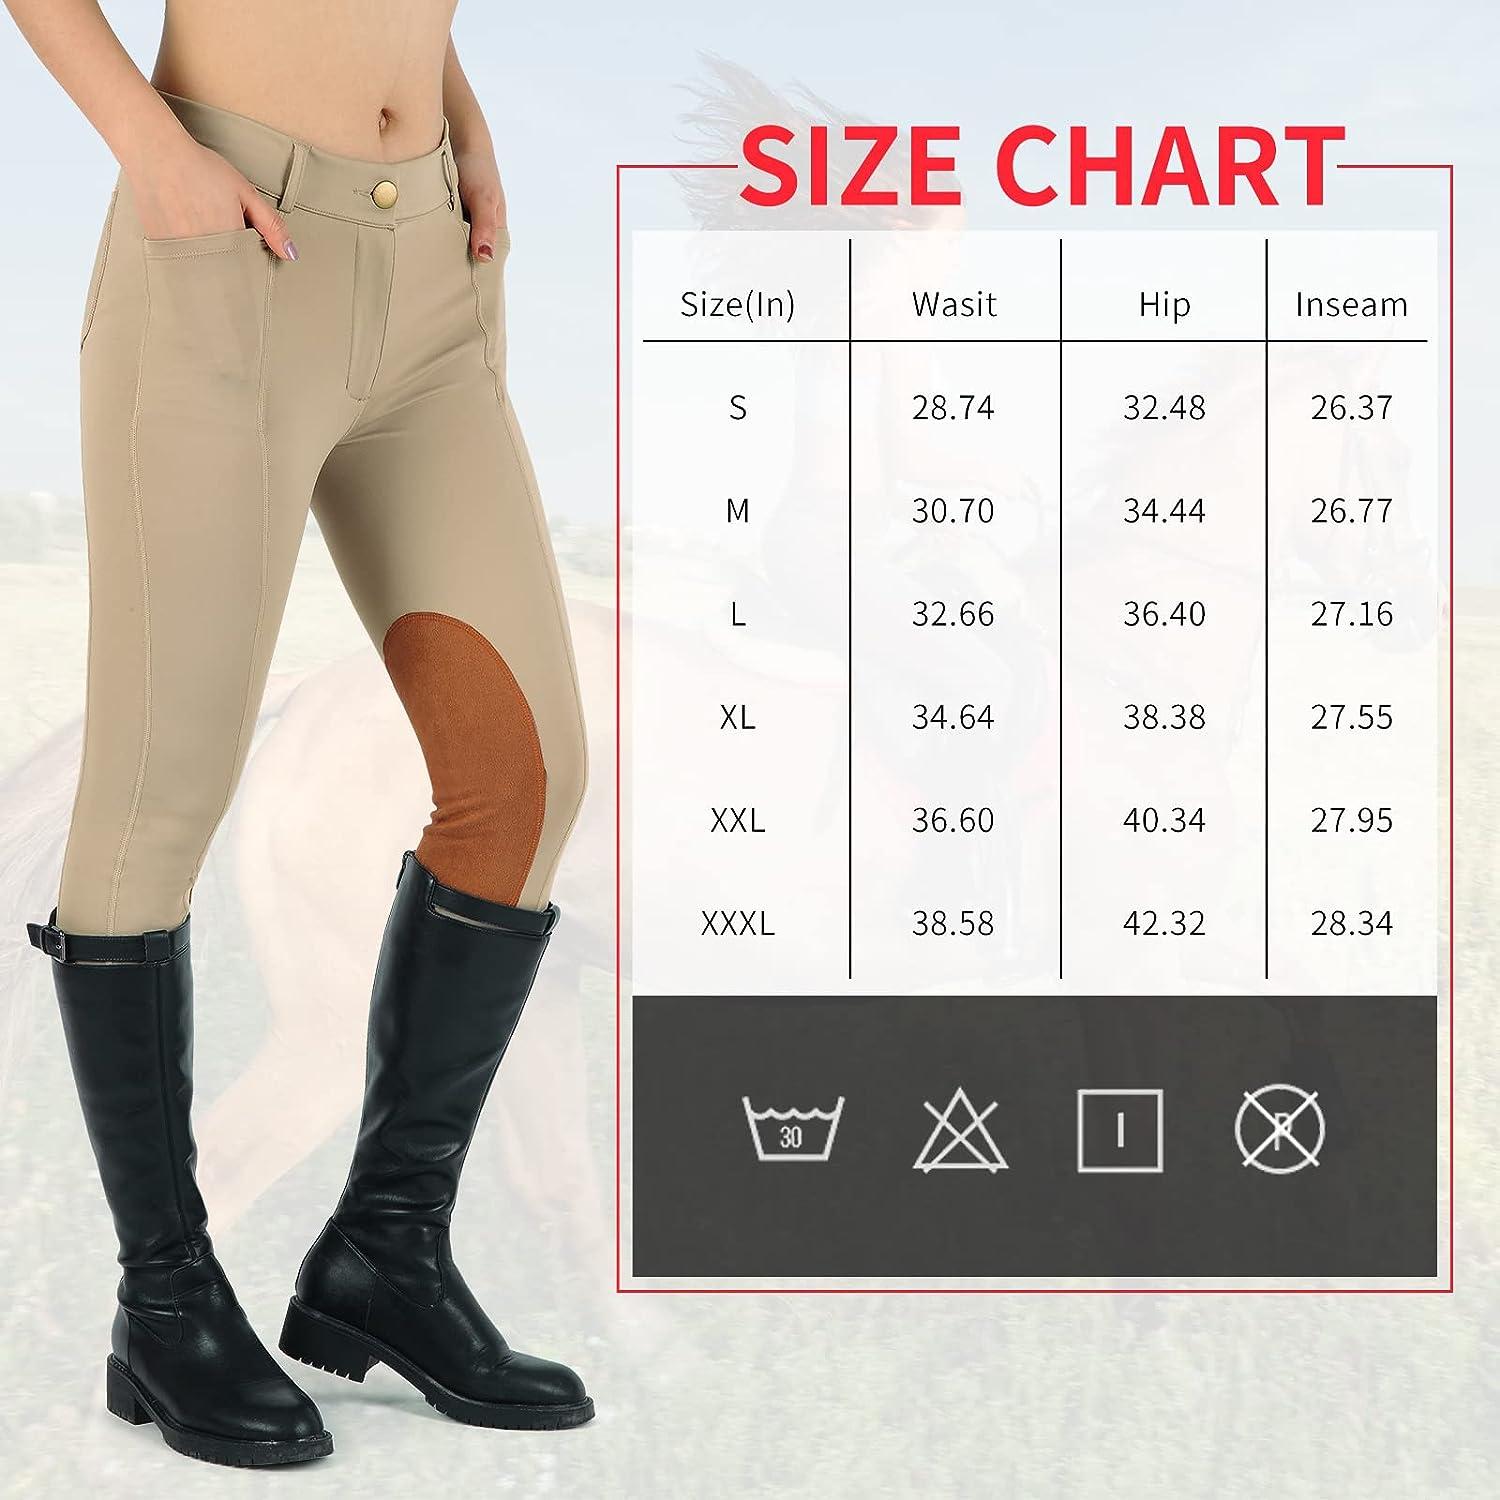 Mens Vintage Jodhpurs Breeches Pant Equestrian Pants Horse Riding Sports  Breeches Polo Pants Baggy Breeches Trousers for Men - Etsy